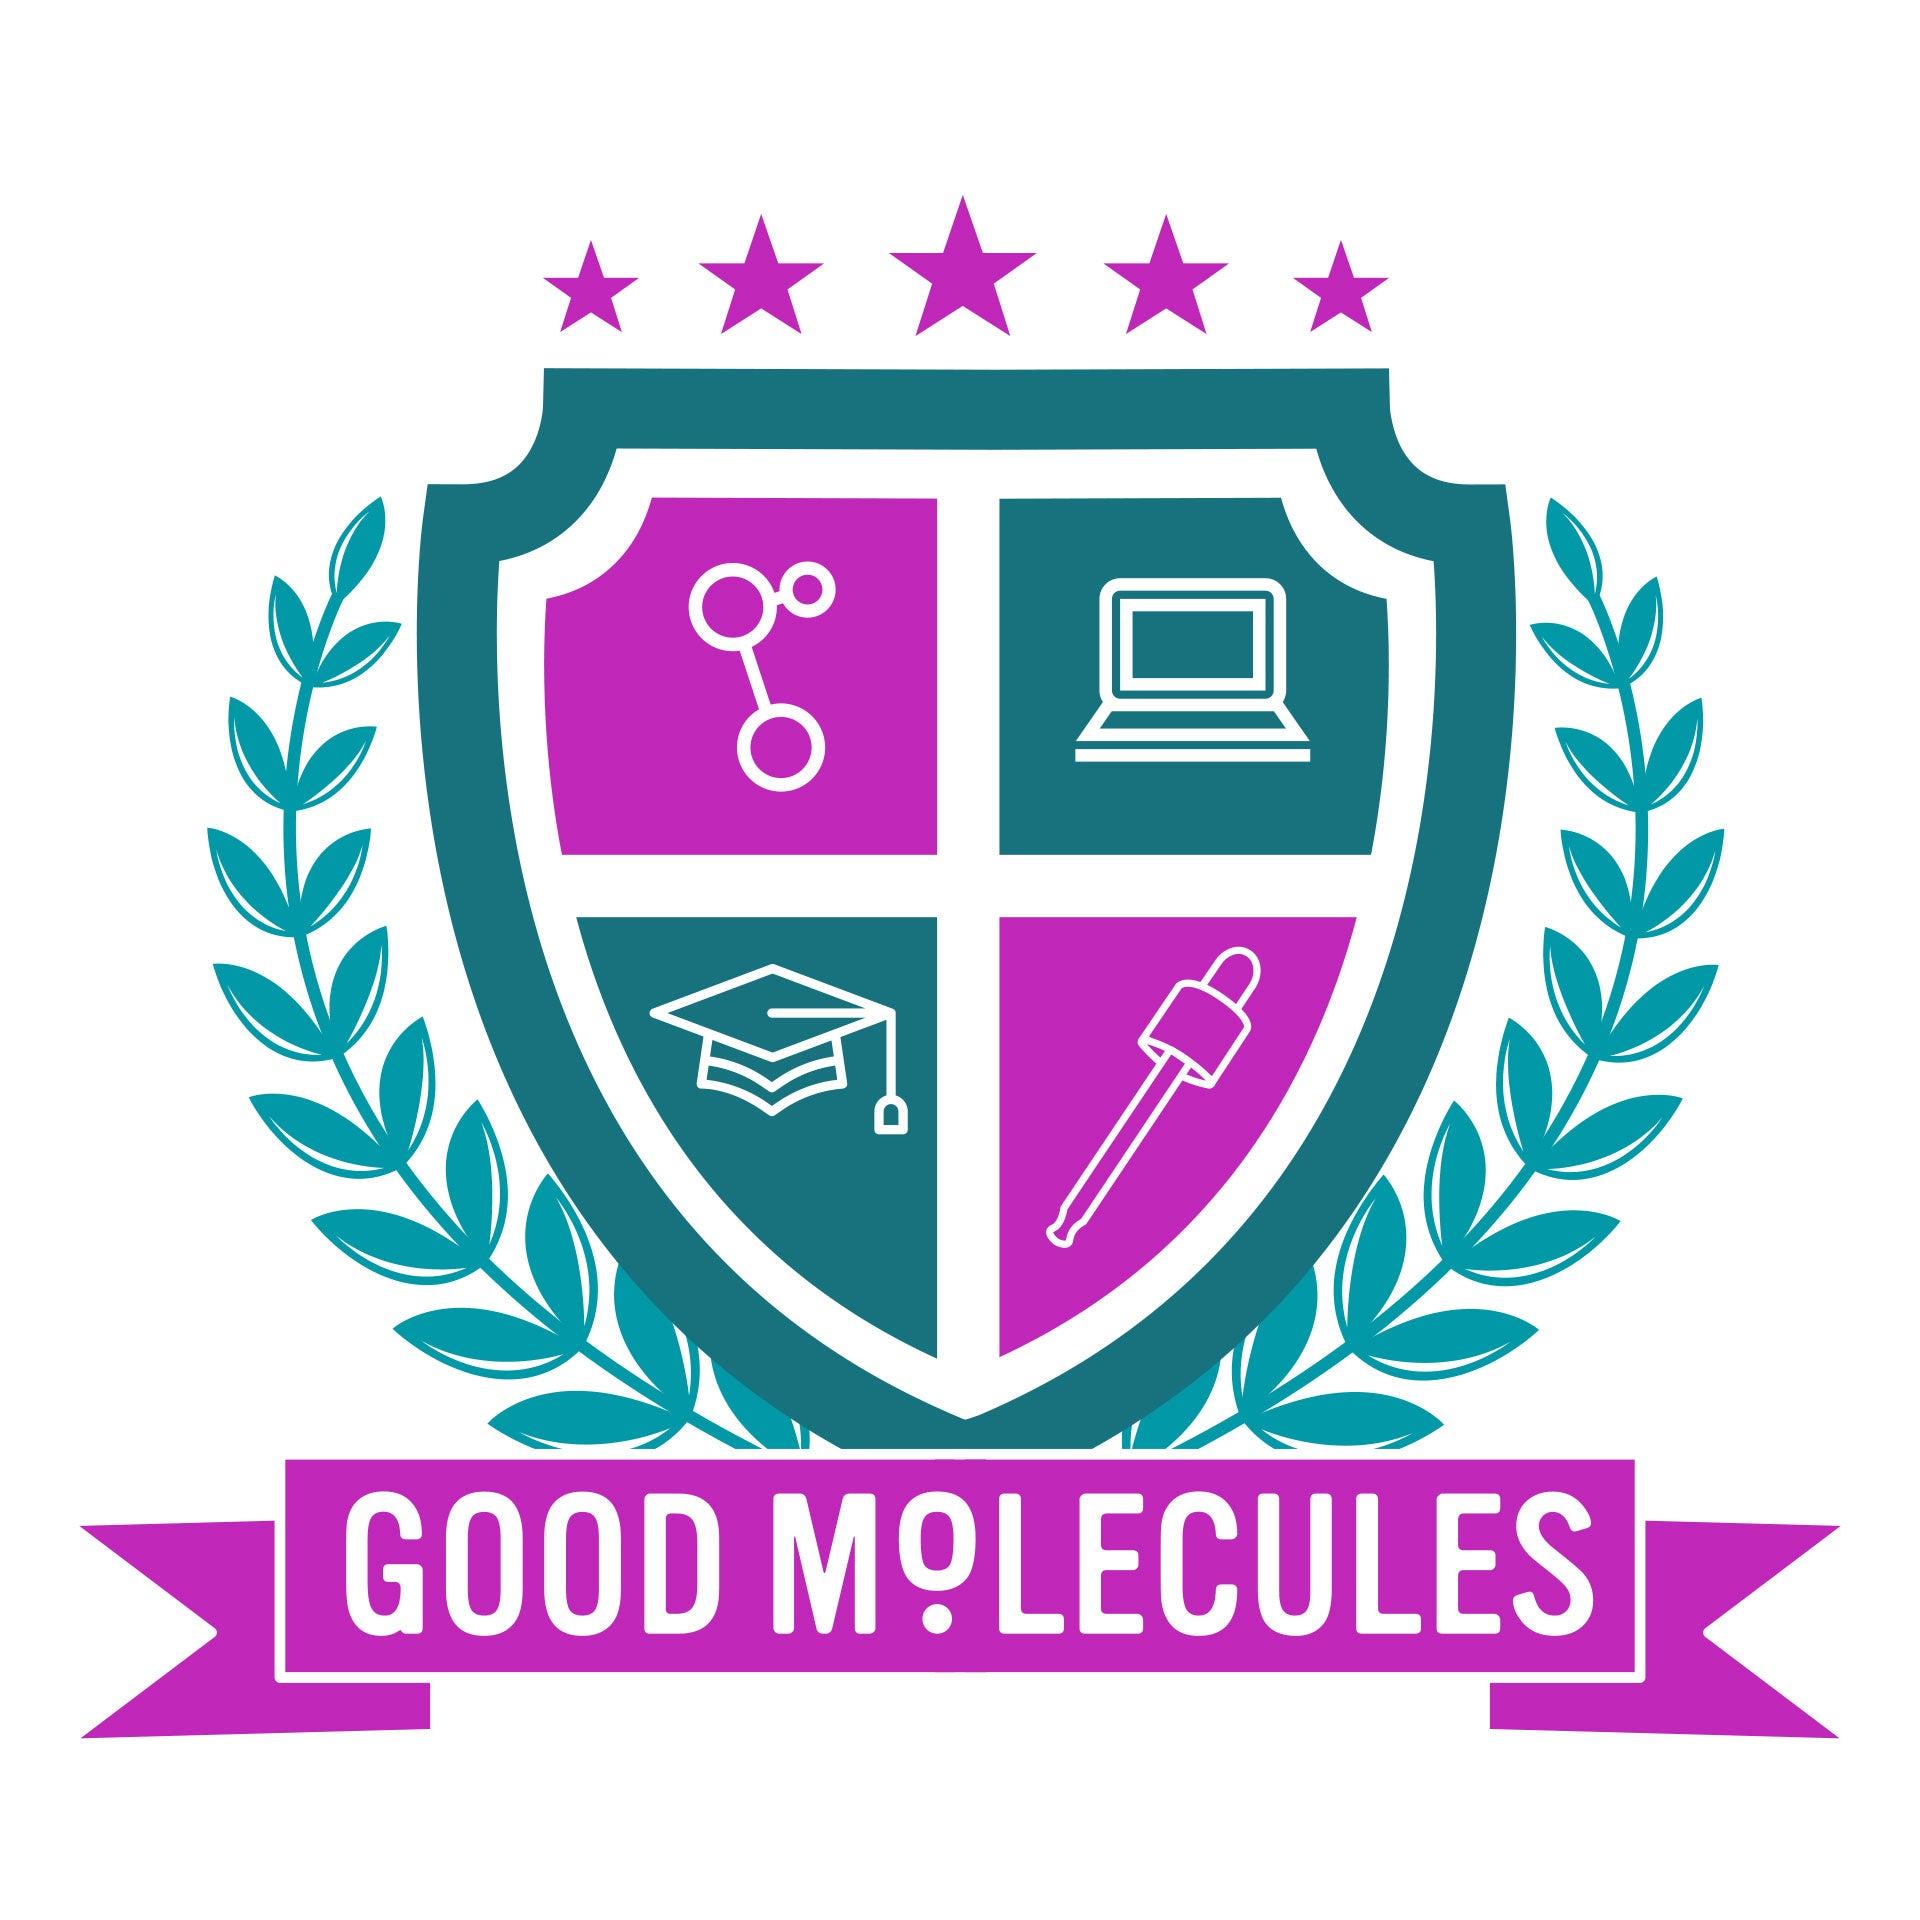 Good Molecules is coming to Florida Agricultural and Mechanical University!